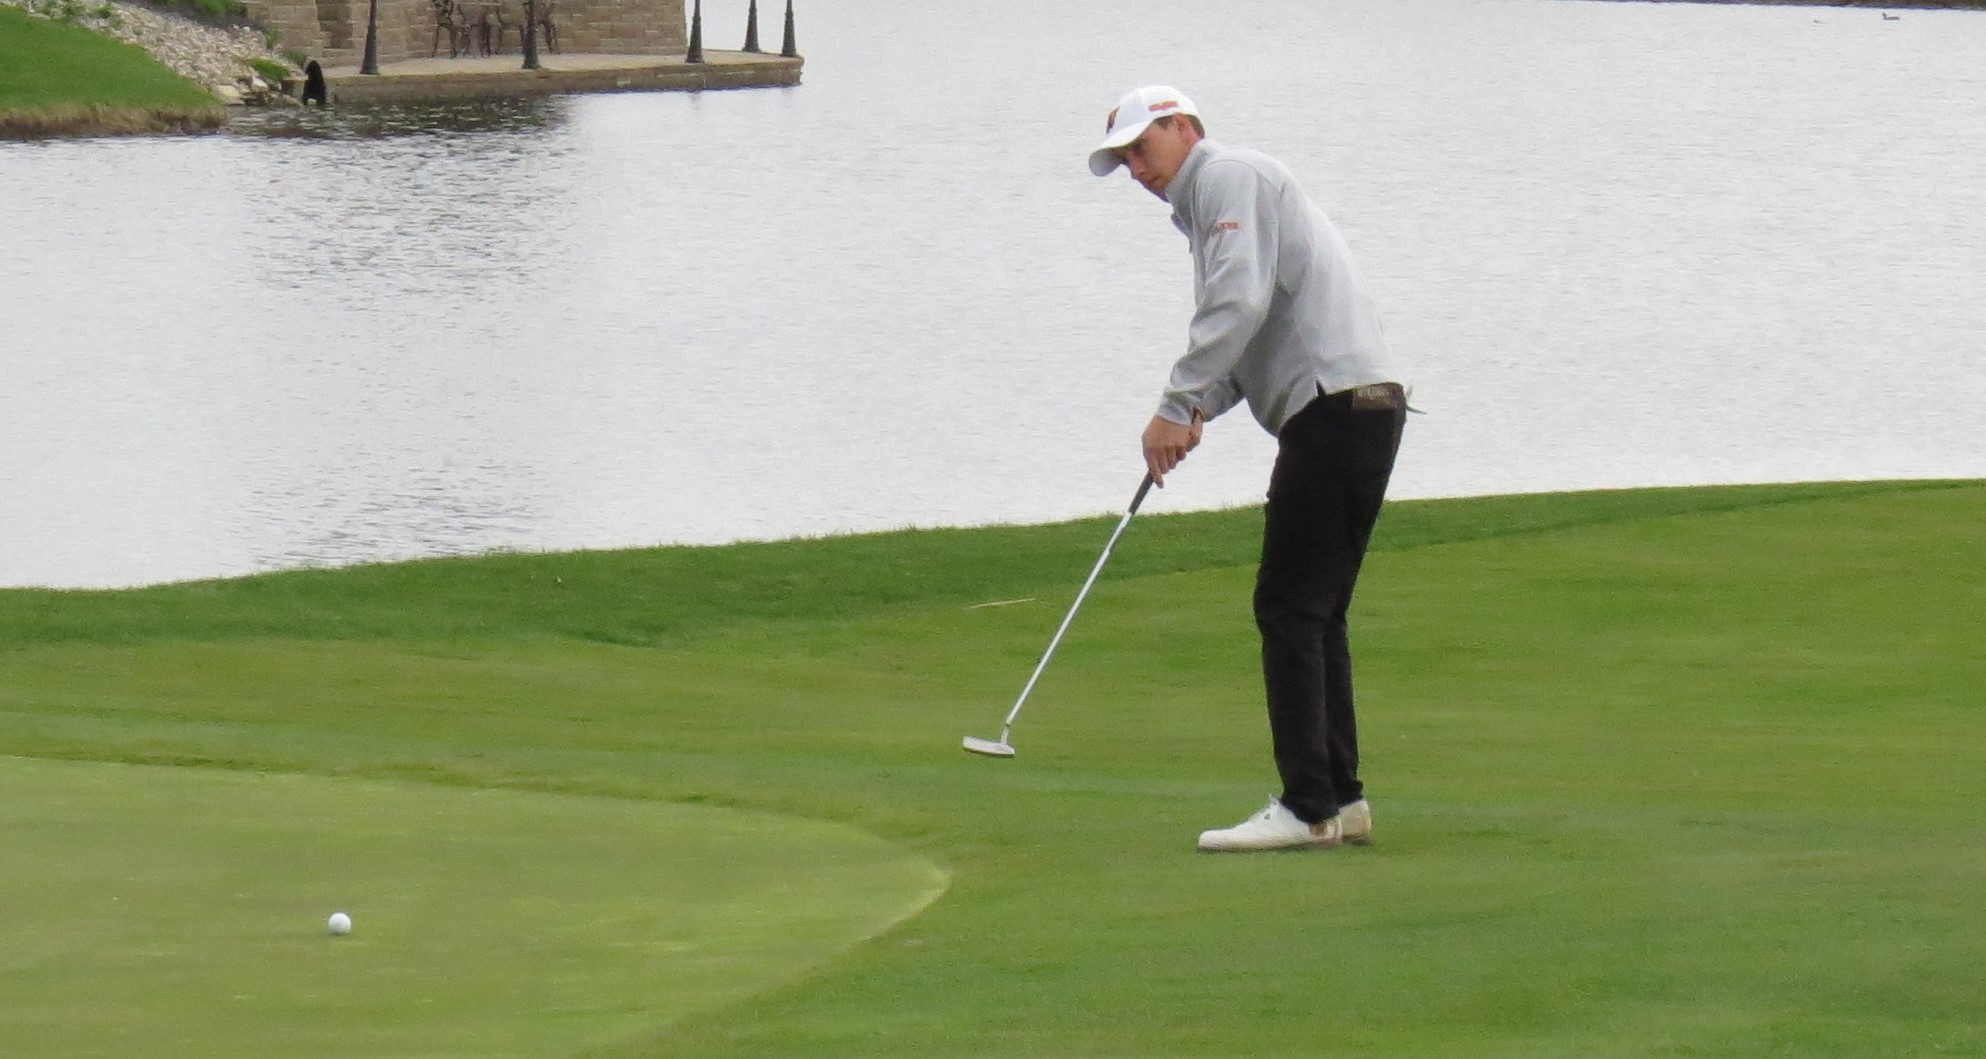 Oilers Lead After 36 Holes at G-MAC Championship